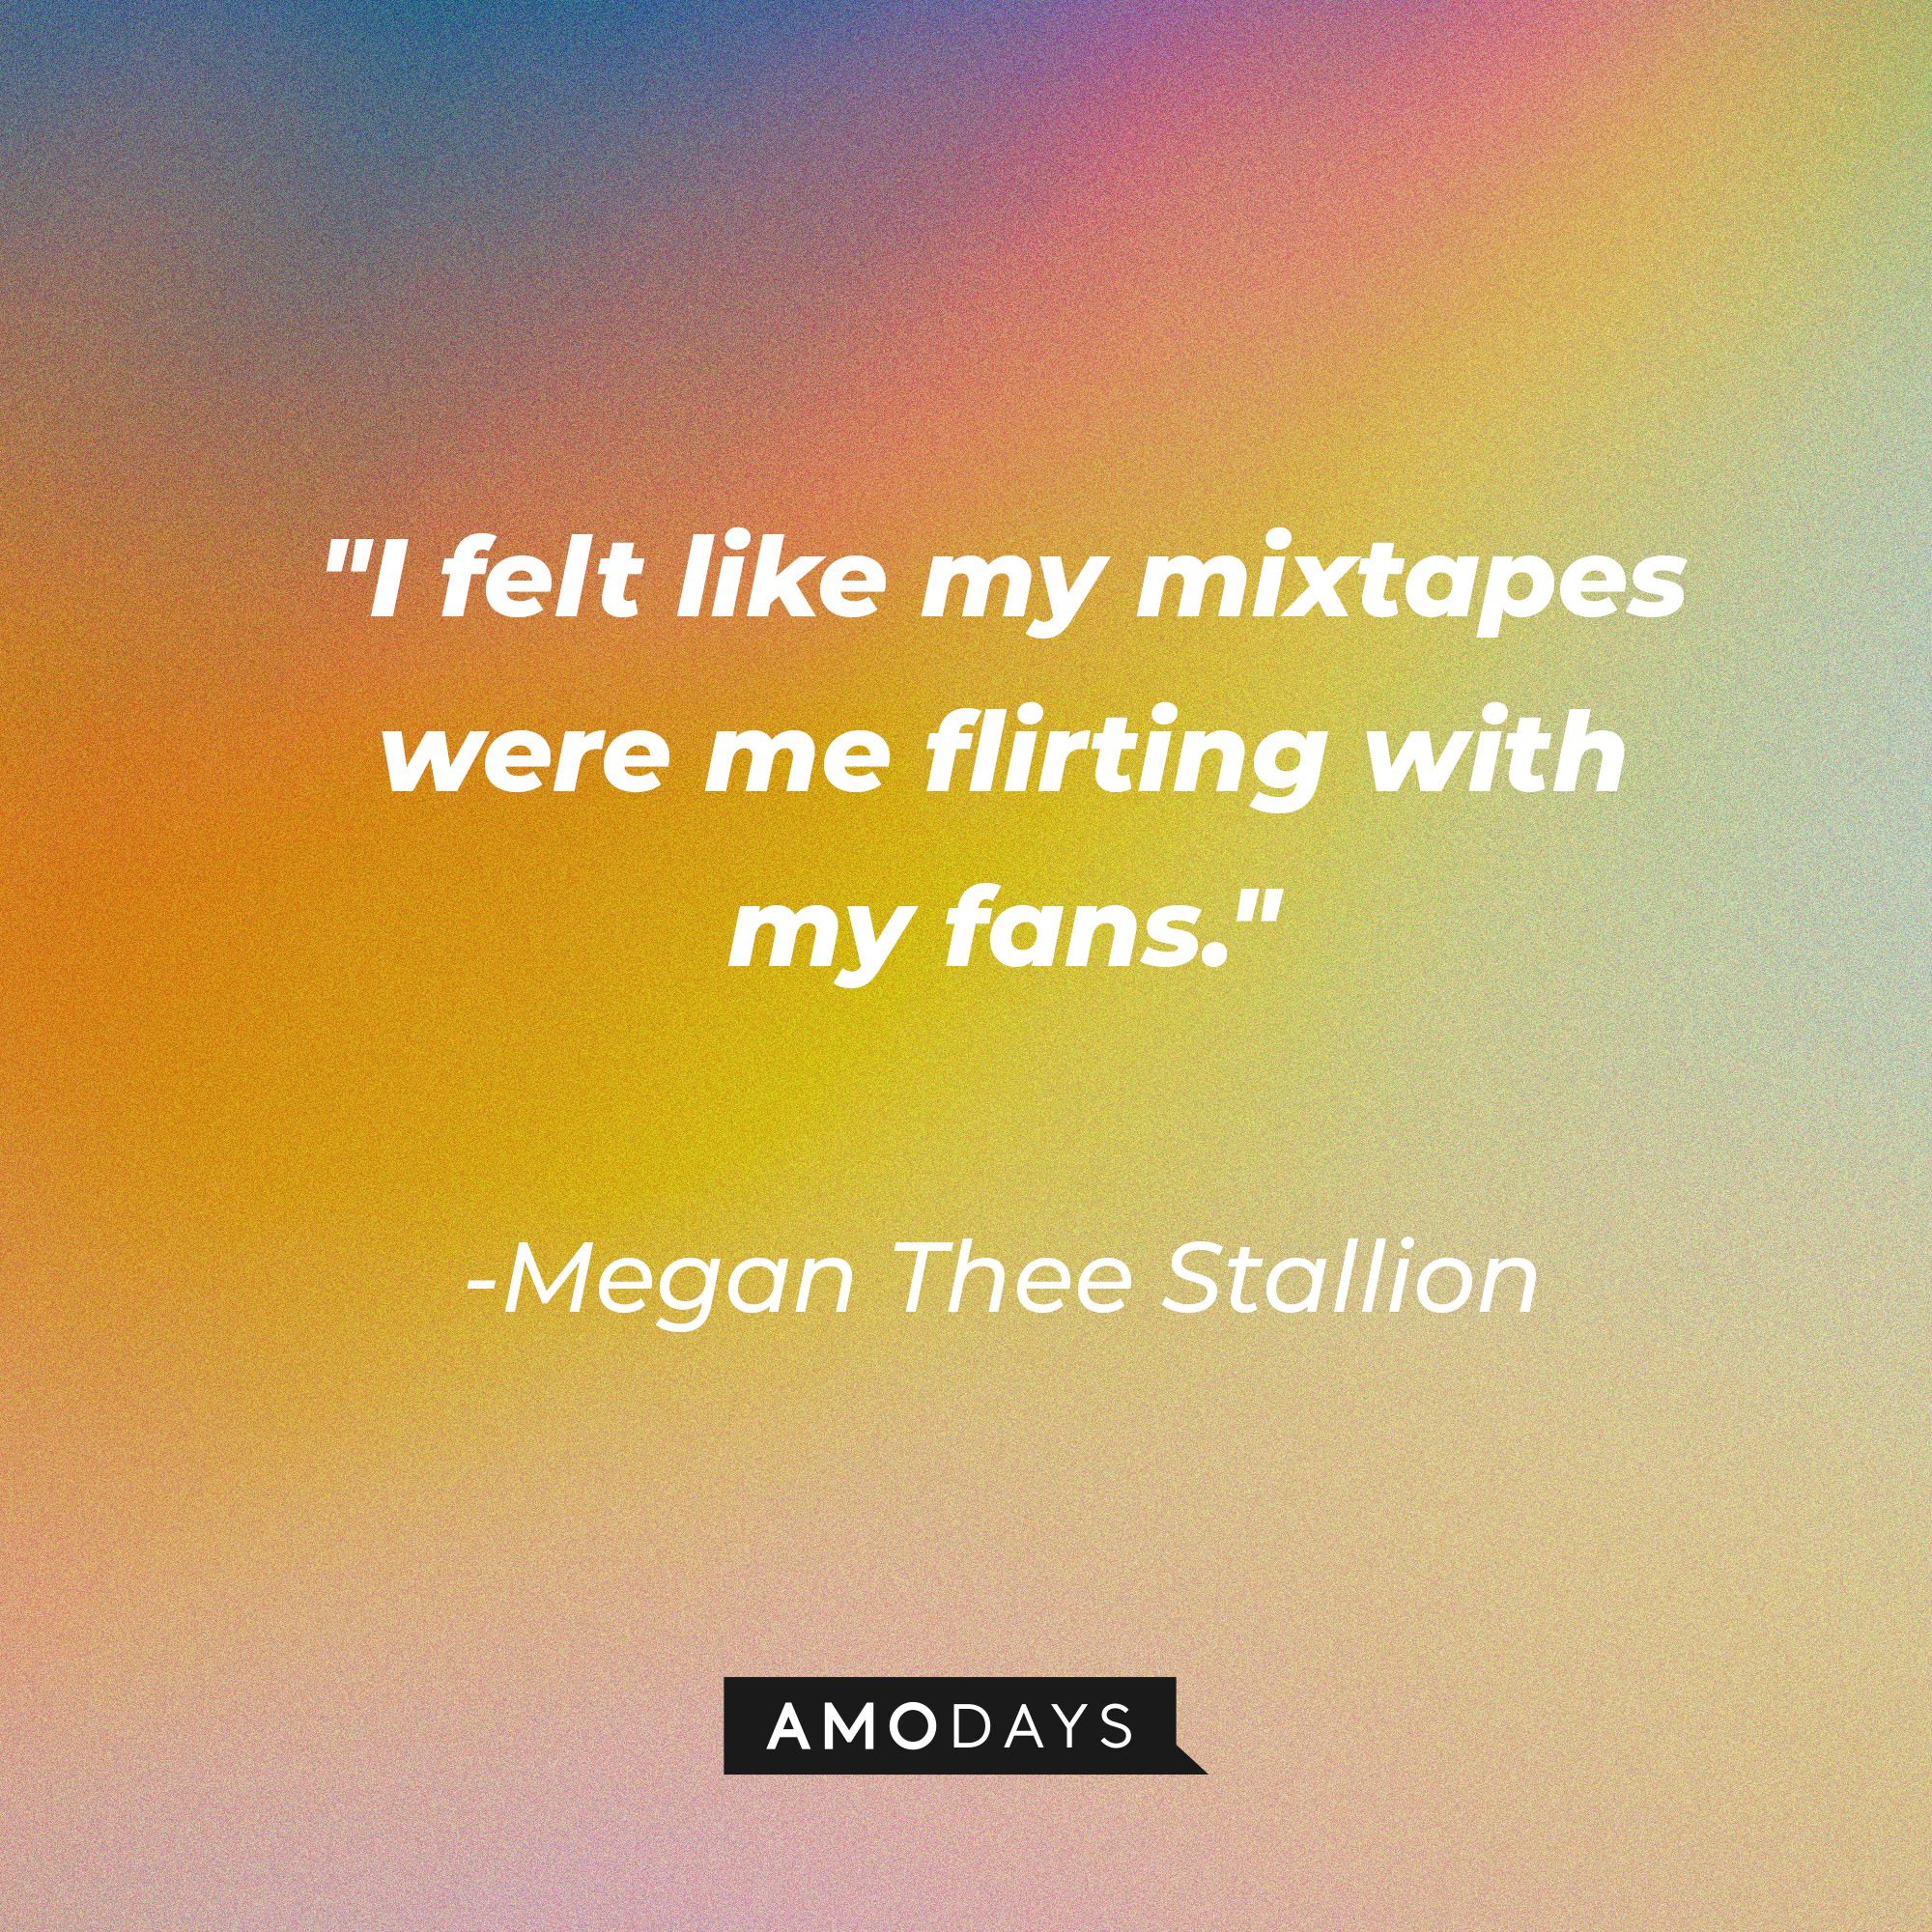 Megan Thee Stallion’s quote: "I felt like my mixtapes were me flirting with my fans." | Image: AmoDays